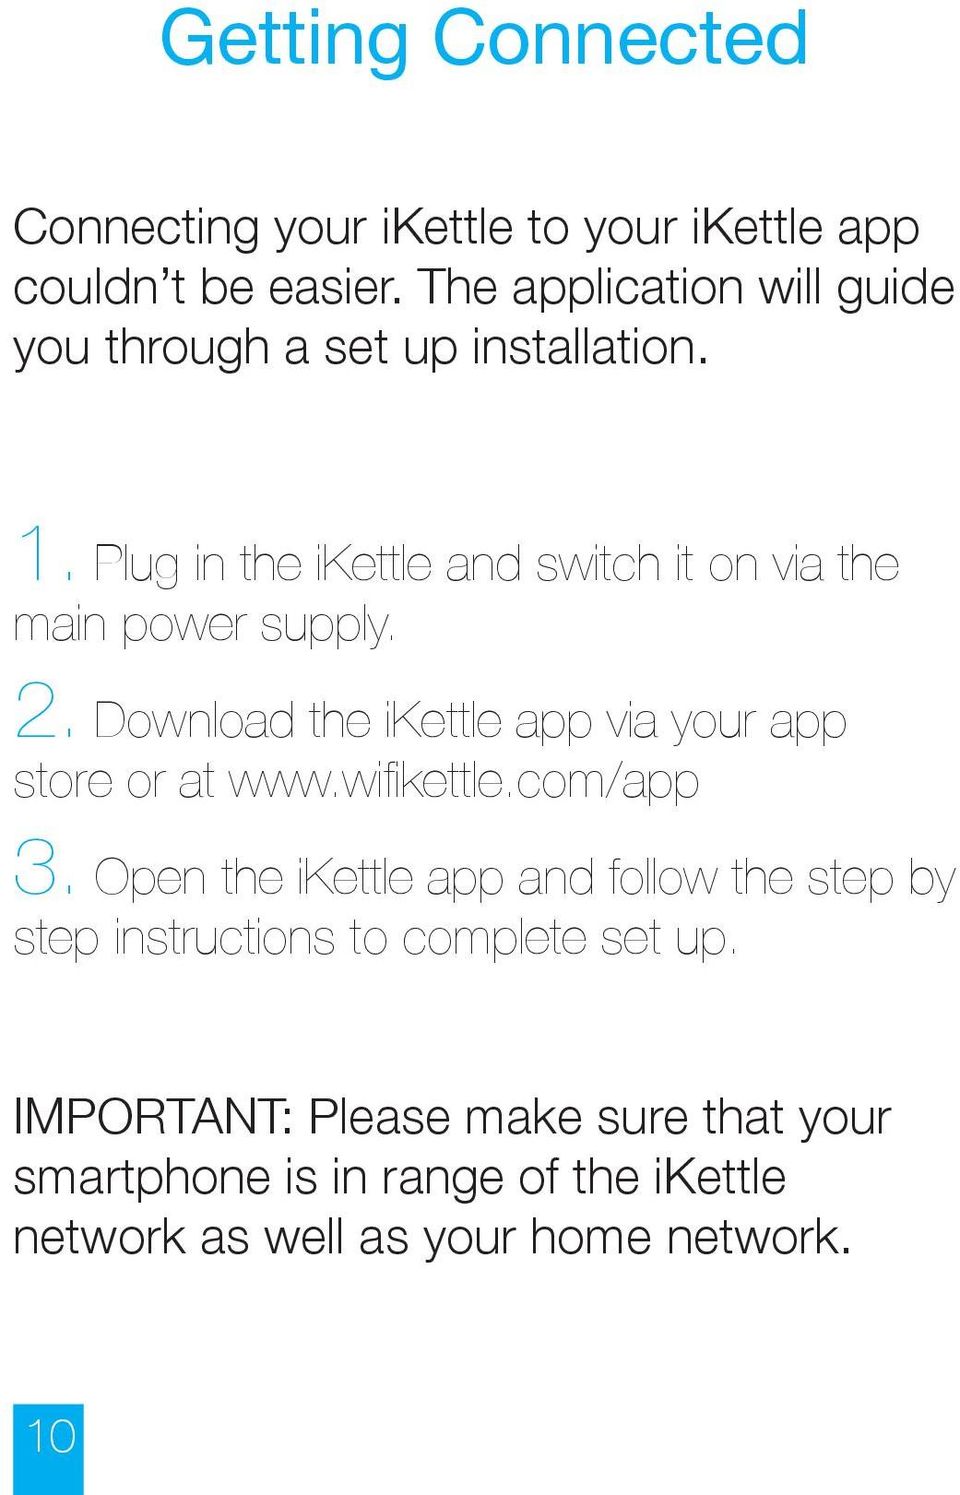 Plug in the ikettle and switch it on via the main power supply. 2. Download the ikettle app via your app store or at www.